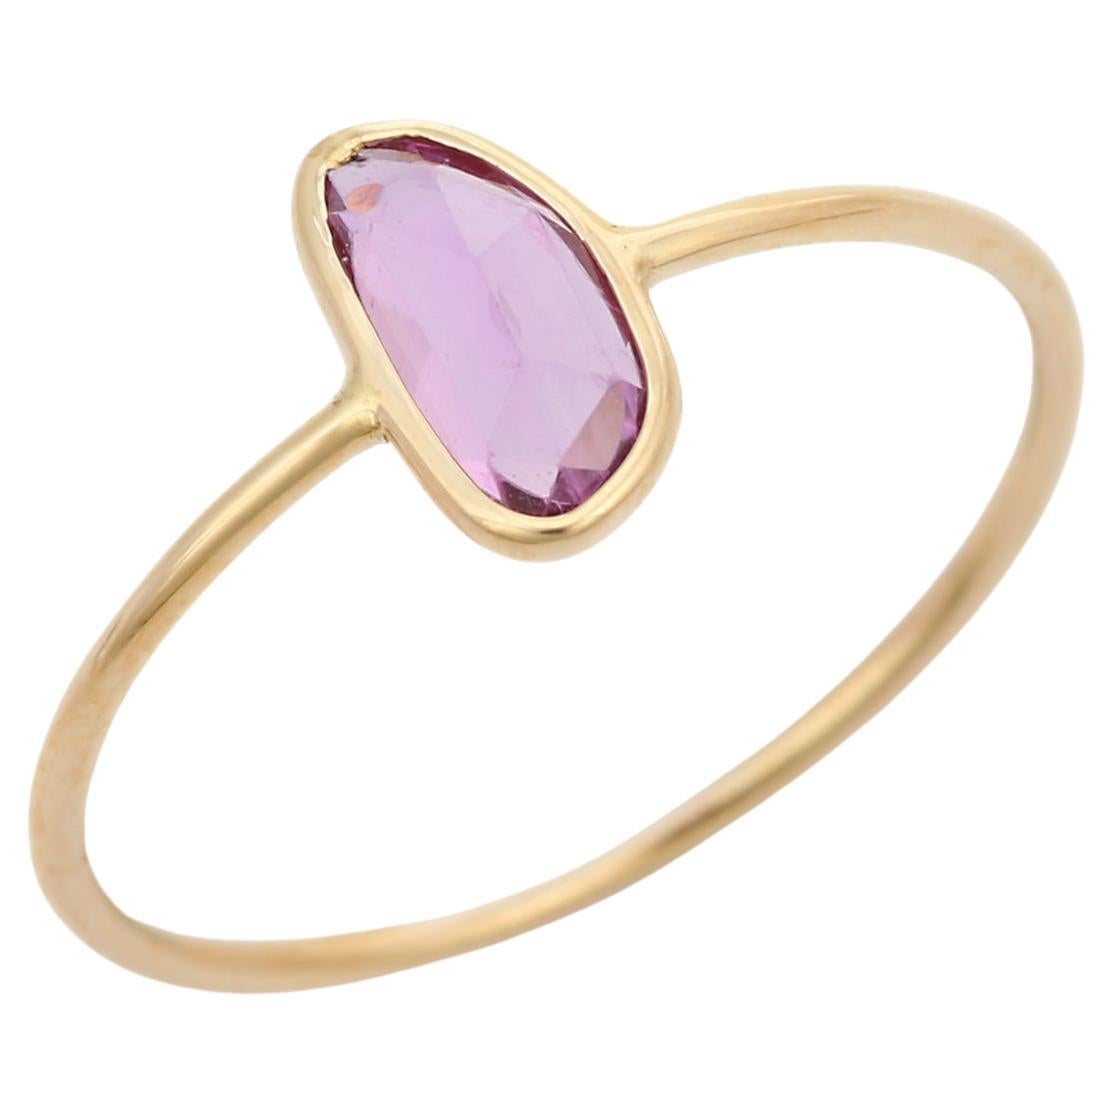 For Sale:  Handcrafted Pink Sapphire Gemstone Single Stone Ring in 14 Karat Yellow Gold